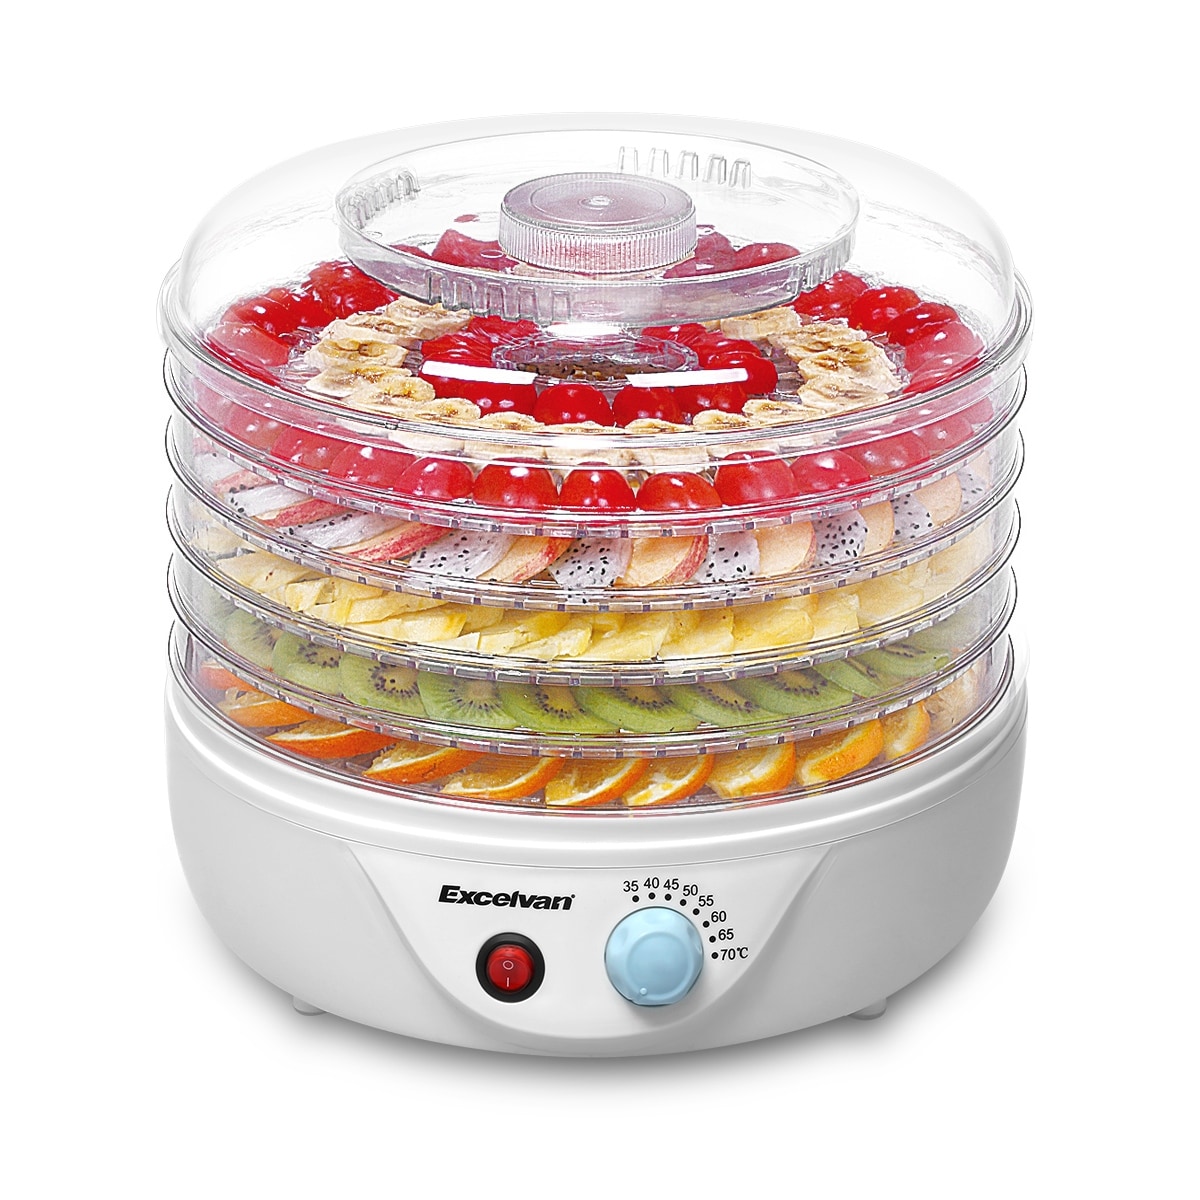 https://ak1.ostkcdn.com/images/products/is/images/direct/f1602d37f1a7d2e306e386d3955697f95eee6aa9/Excelvan-5-Tier-Electric-Food-Fruit-Dehydrator%2C-Food-Preserver-with-Adjustable-Temperature-Control.jpg